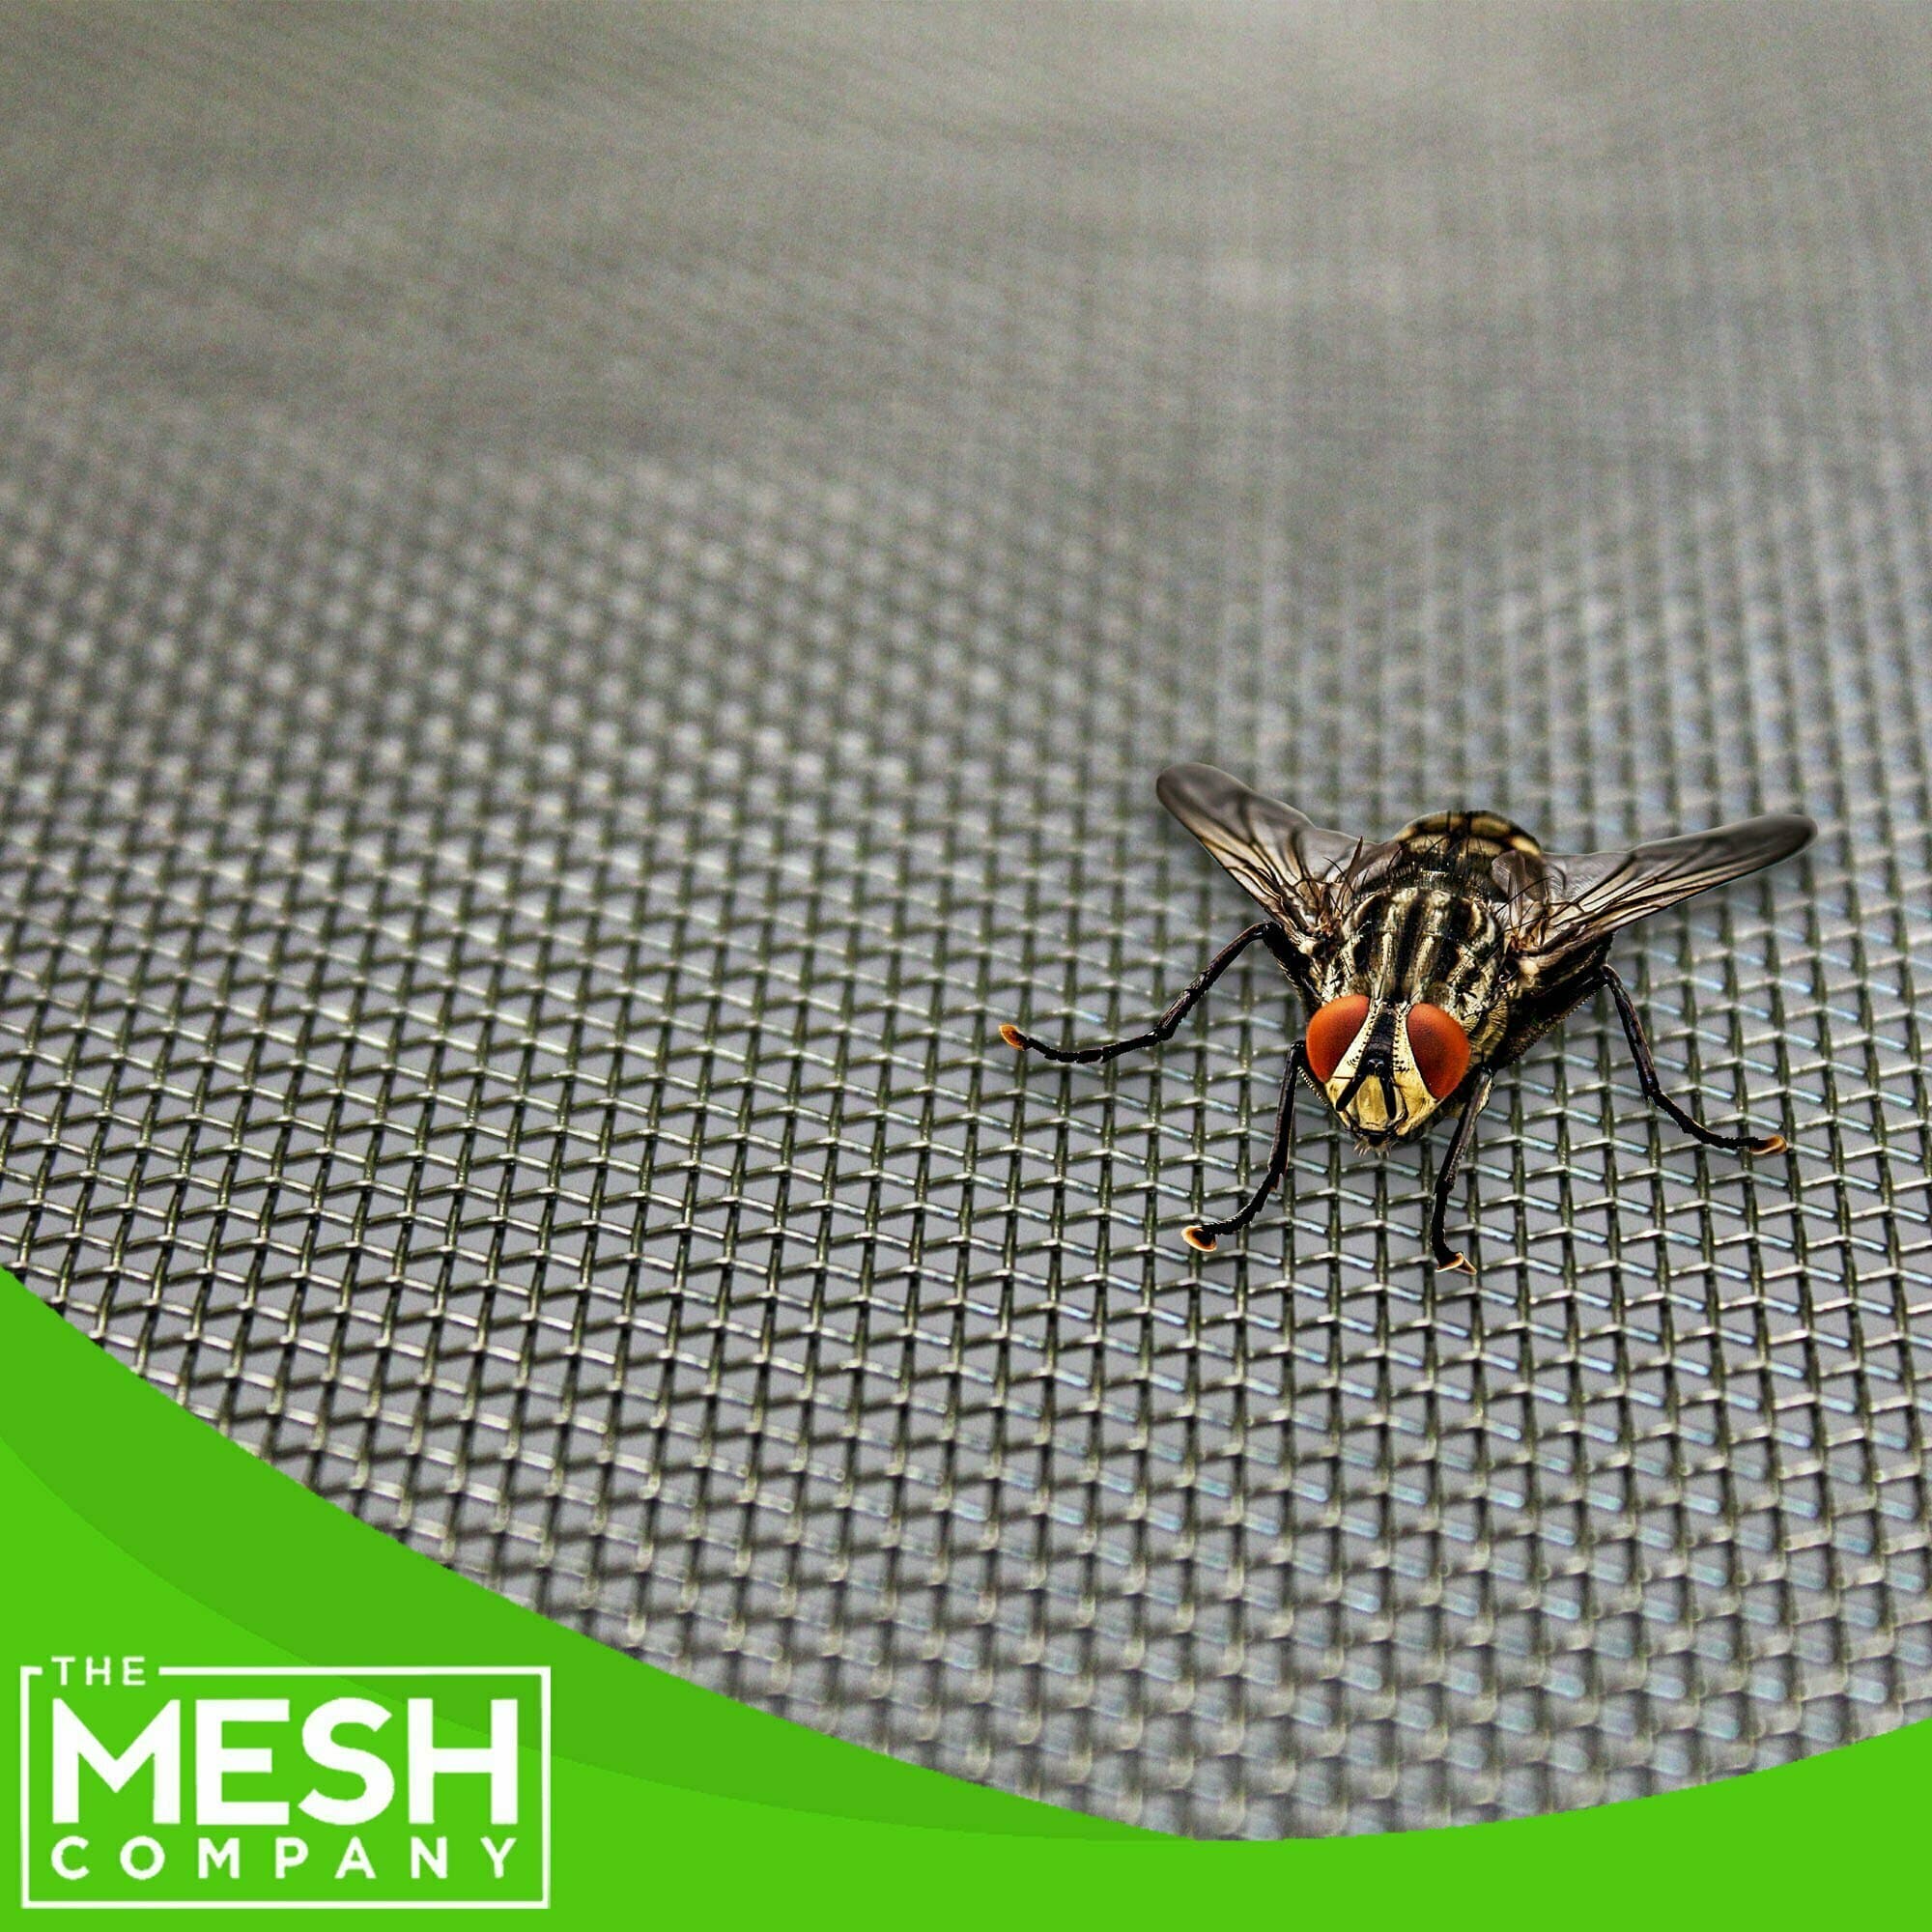 https://themeshcompany.com/wp-content/uploads/2023/02/Insect-And-Bee-Mesh-Image-With-The-Mesh-Company-Branding.jpg